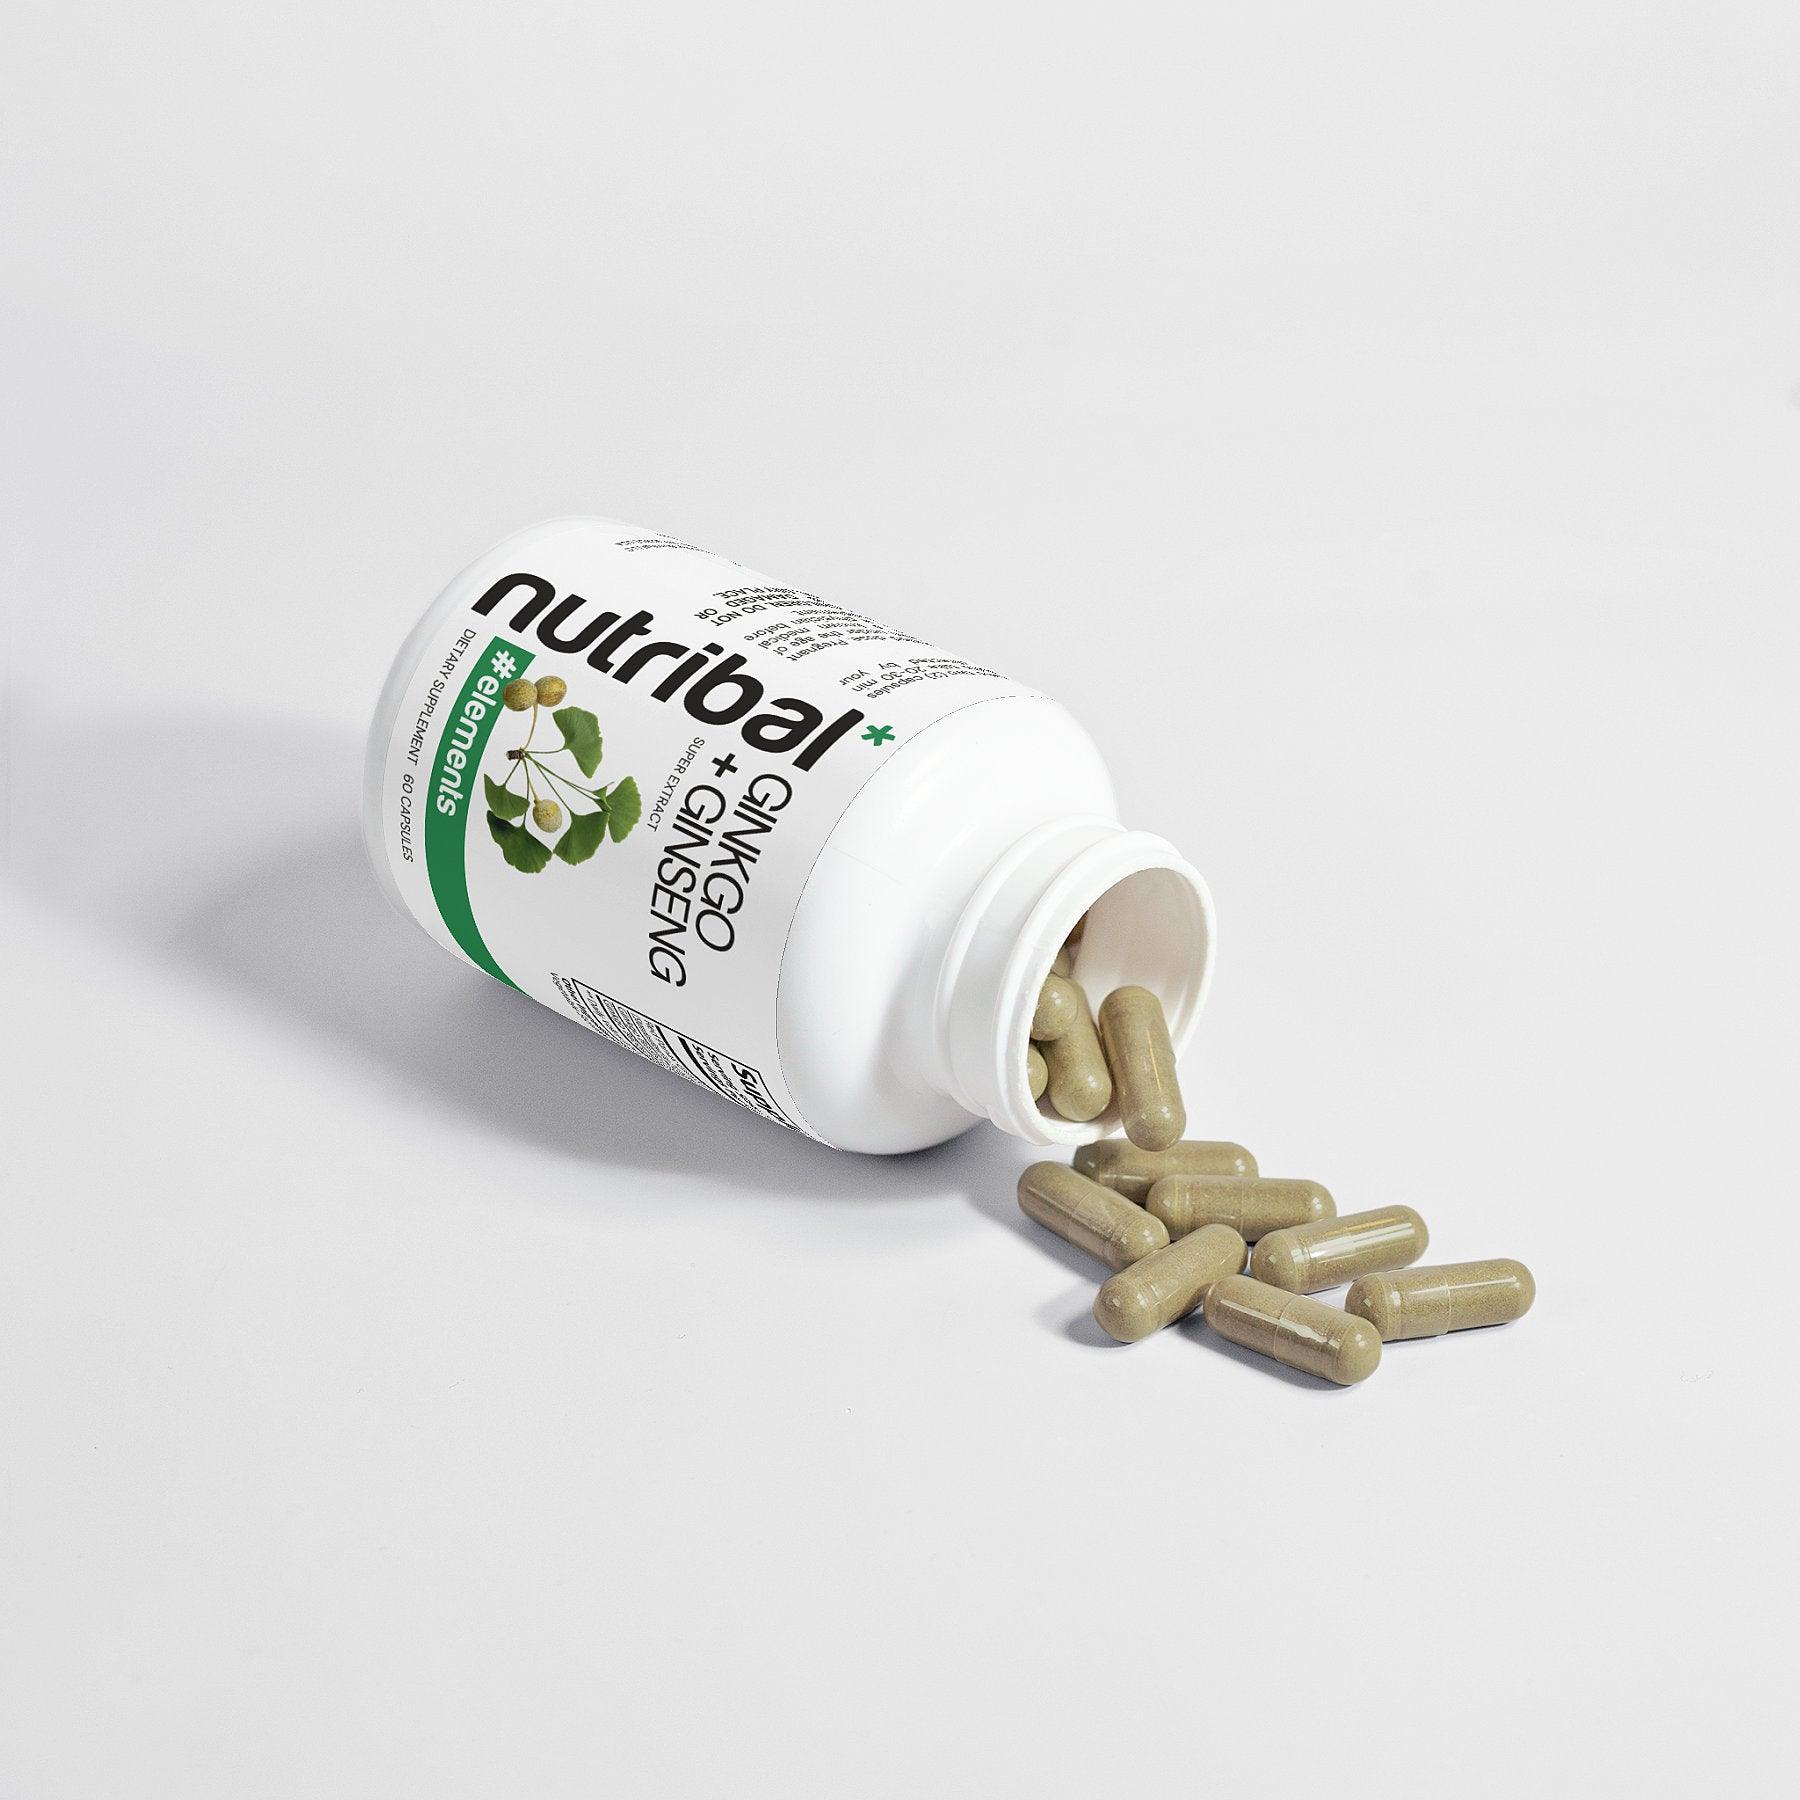 Nutribal GINKGO & GINSENG Super Complex - Nutribal™ - The New Healthy.